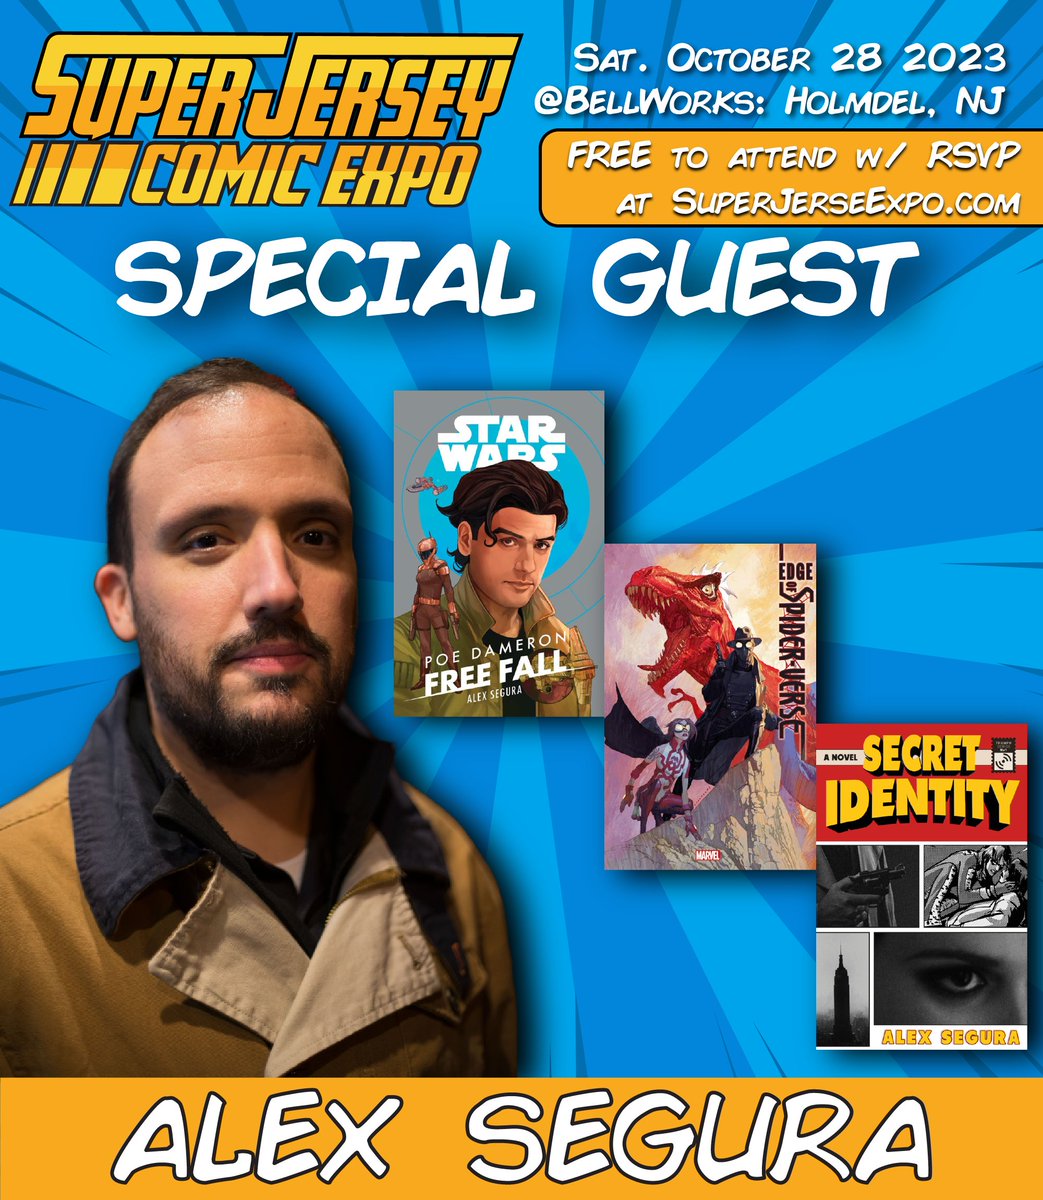 THIS SAT. 10/28! Hot off the #NYCC announcement of DICK TRACY from @MadCaveStudios, we're elated to have @alex_segura appearing at the universe's largest(*) Free-for-2023 comic convention! 📍: @bell_works 🕙: 10a-5p 🎟: FREE- RSVP at bit.ly/sjce23 (*citation needed)